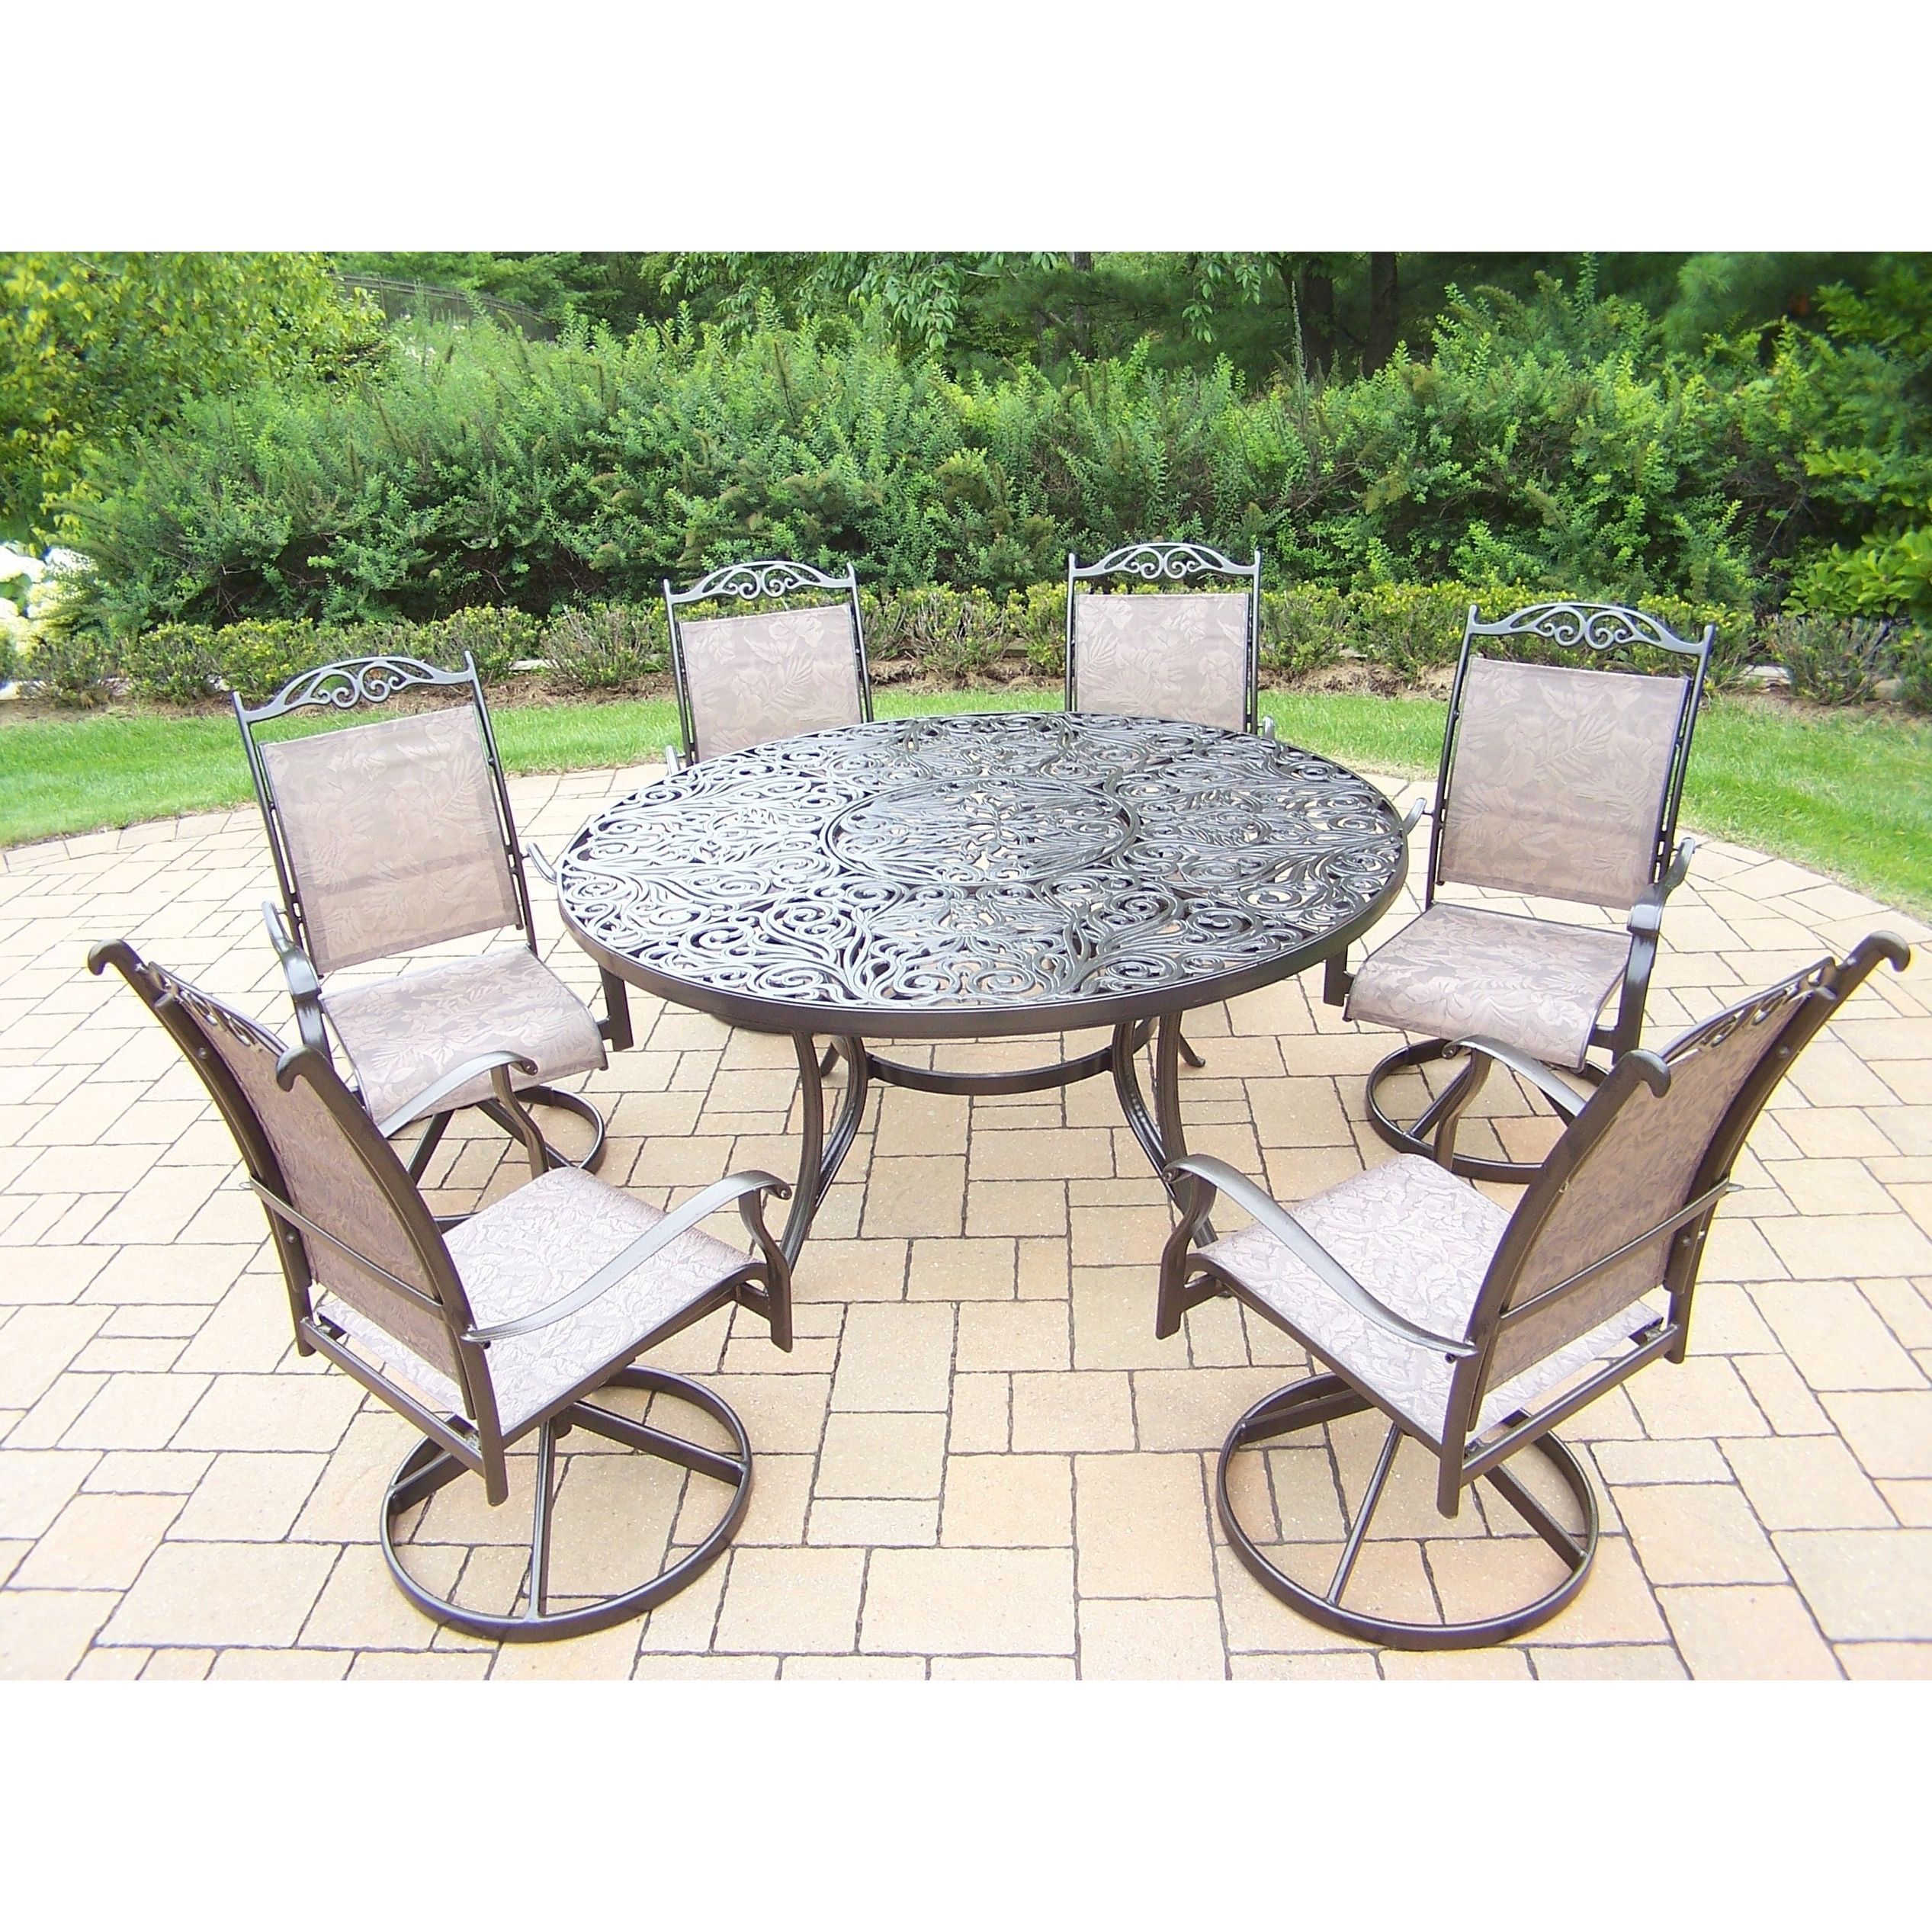 Aluminum 7 Piece Outdoor Patio Dining Set With 6 Swivel Brown 7 Piece Intended For Famous 7 Piece Patio Dining Sets (View 6 of 15)